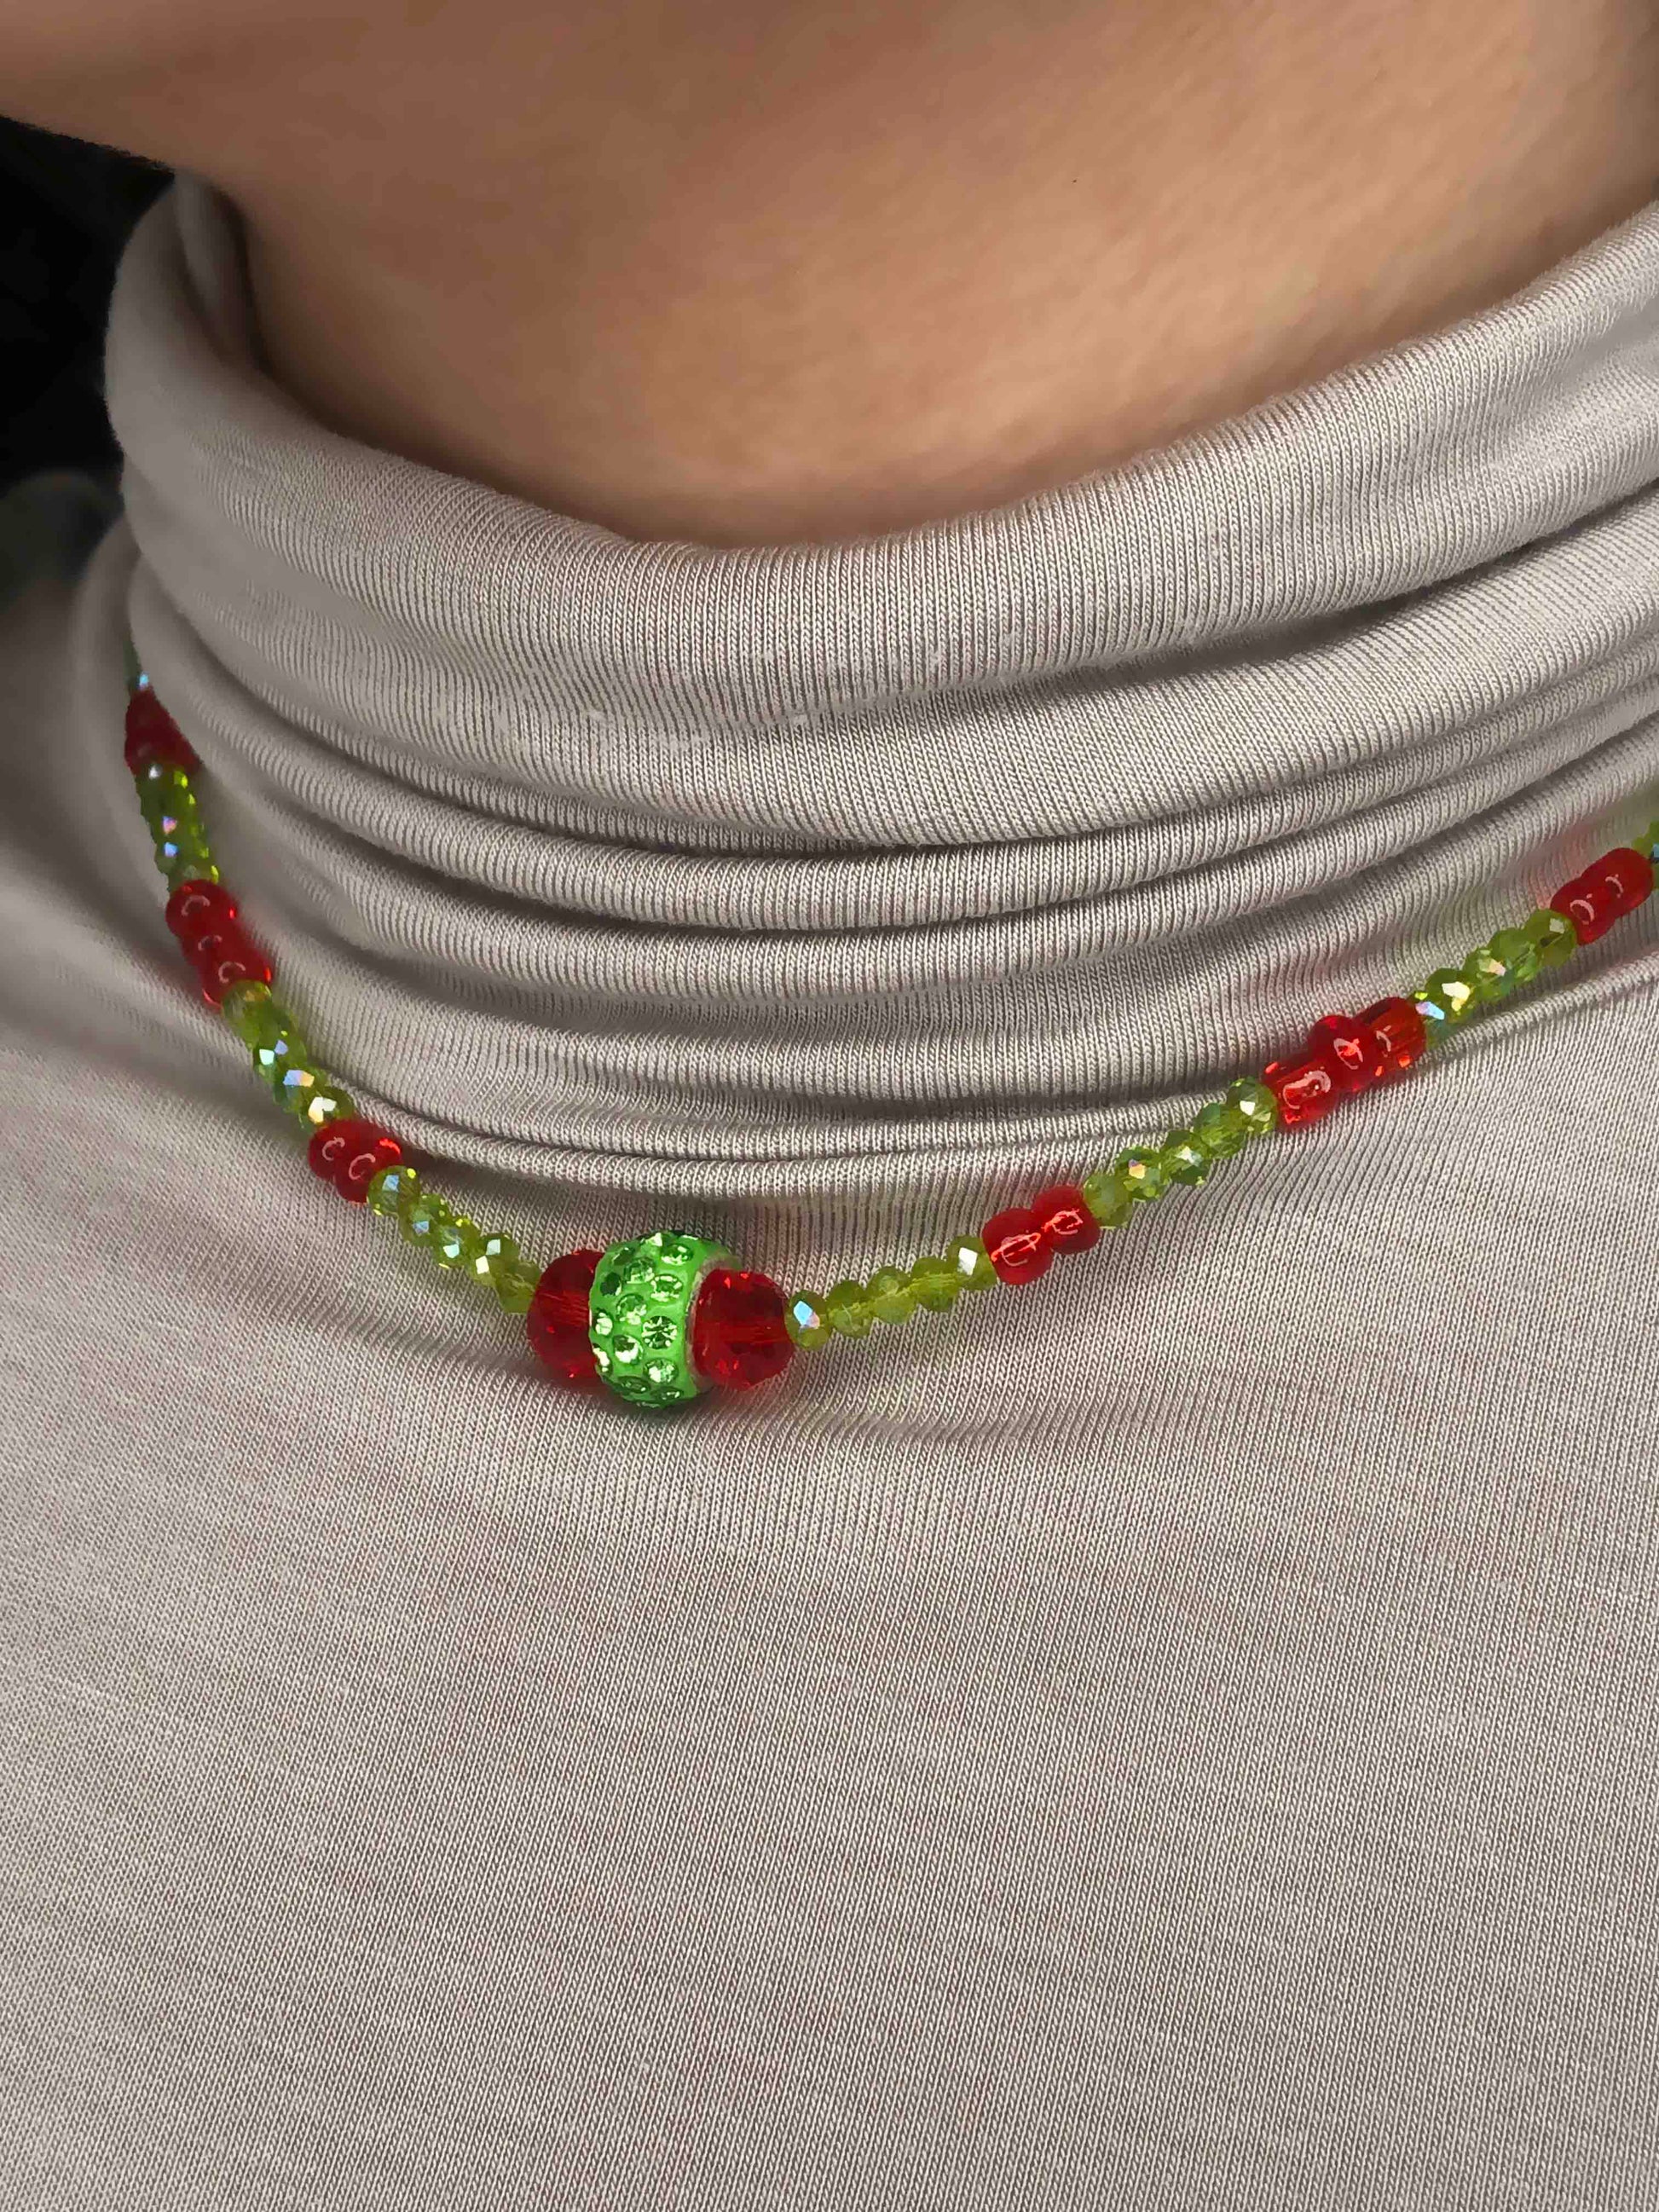 Handcrafted red and green crystal beaded necklace with rhinestone charm at its center.